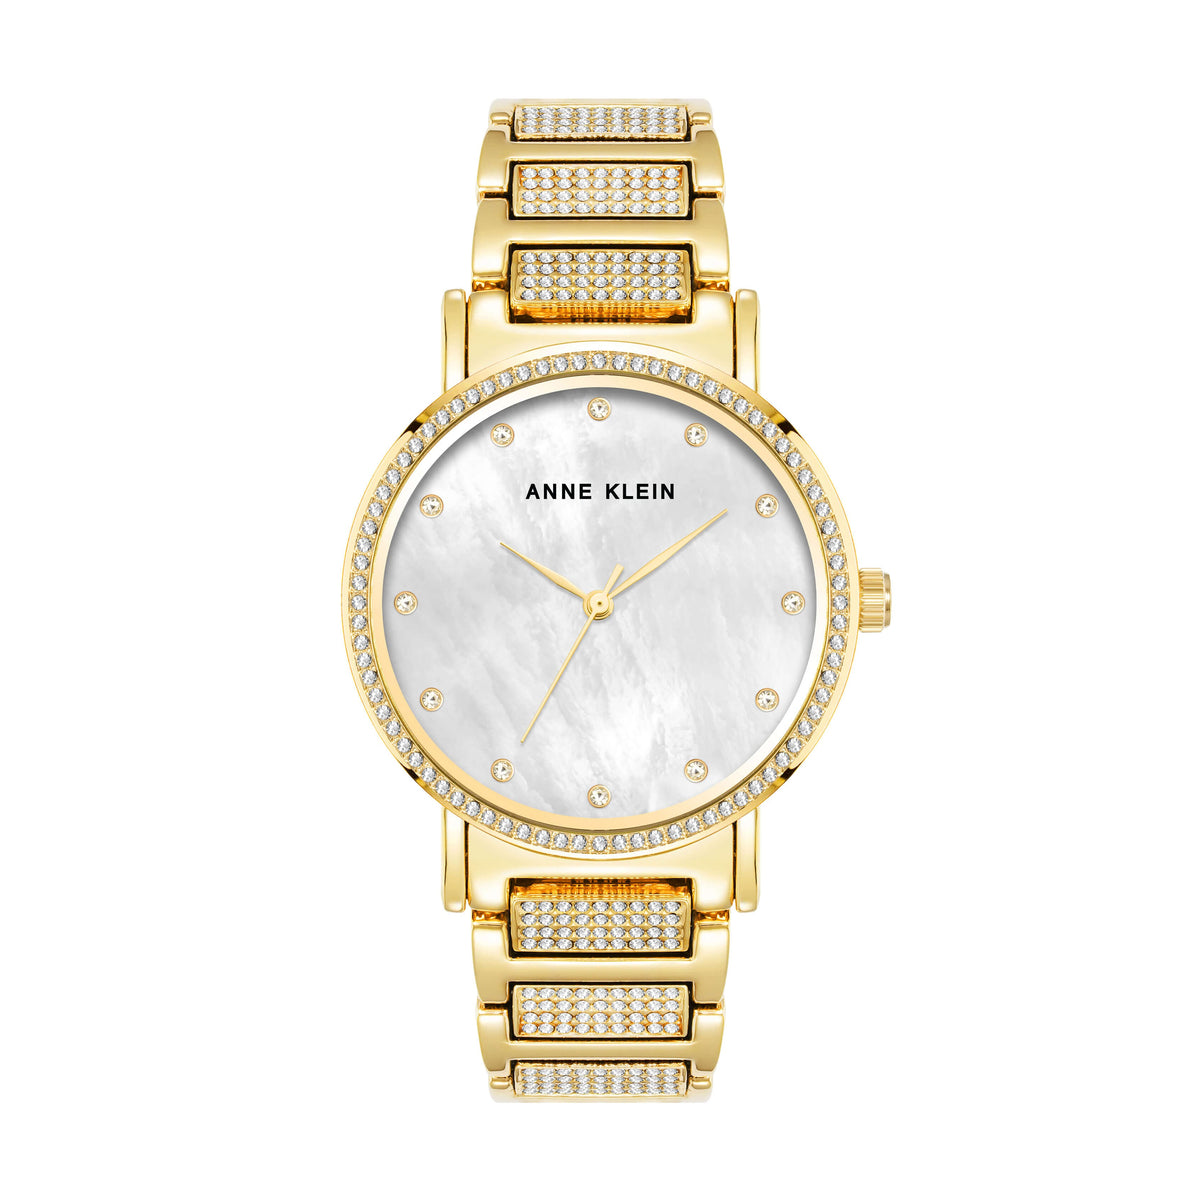 Anne Klein Pakistan - Anne Klein Women's Two-Tone Metal Bracelet Watch Now  you can book your watch online through your WHATSAPP - 0346 0081268 Model #  AK/3109SVRT Price Rs. 13,500/-   For